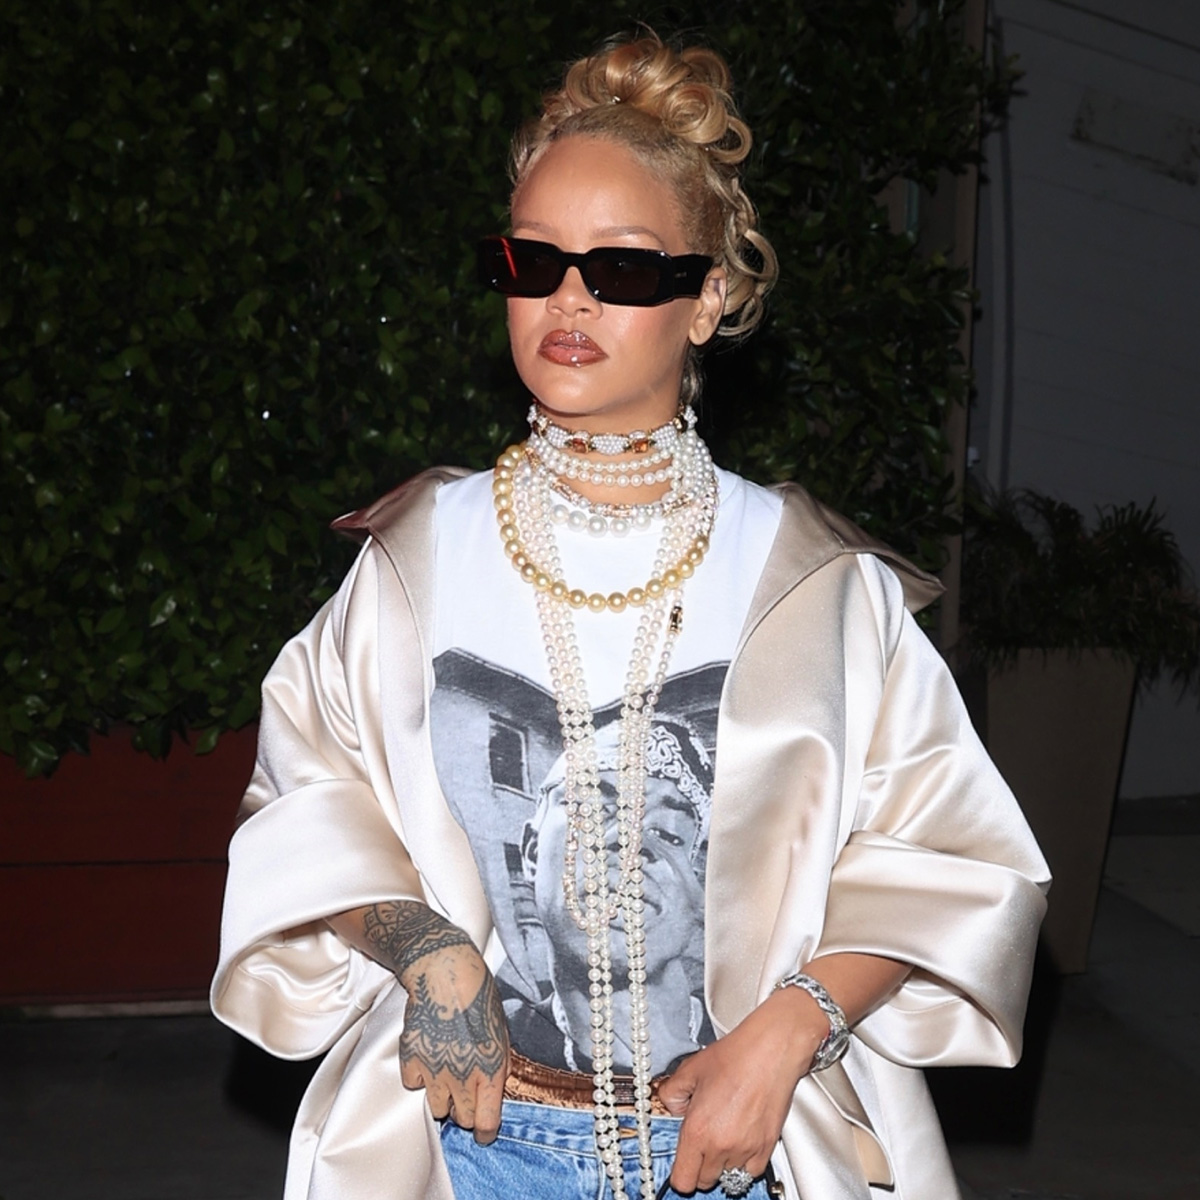 Rihanna Just Made Jeans and a T-Shirt Look Fancy With This Pretty Trend